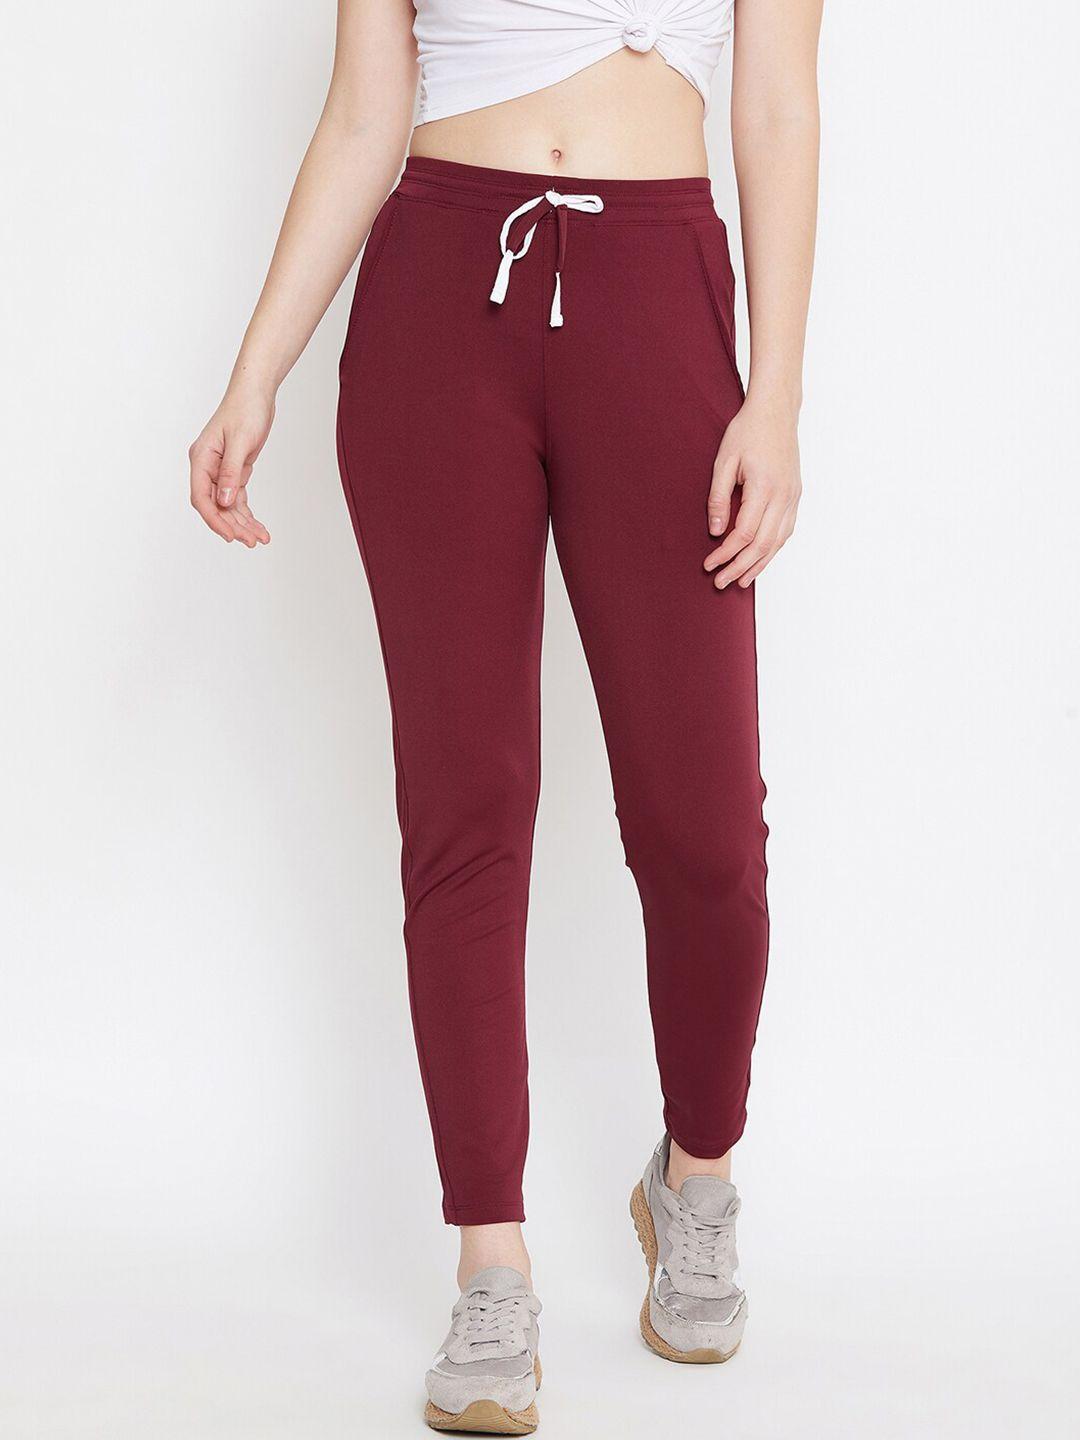 crease & clips women maroon solid track pants